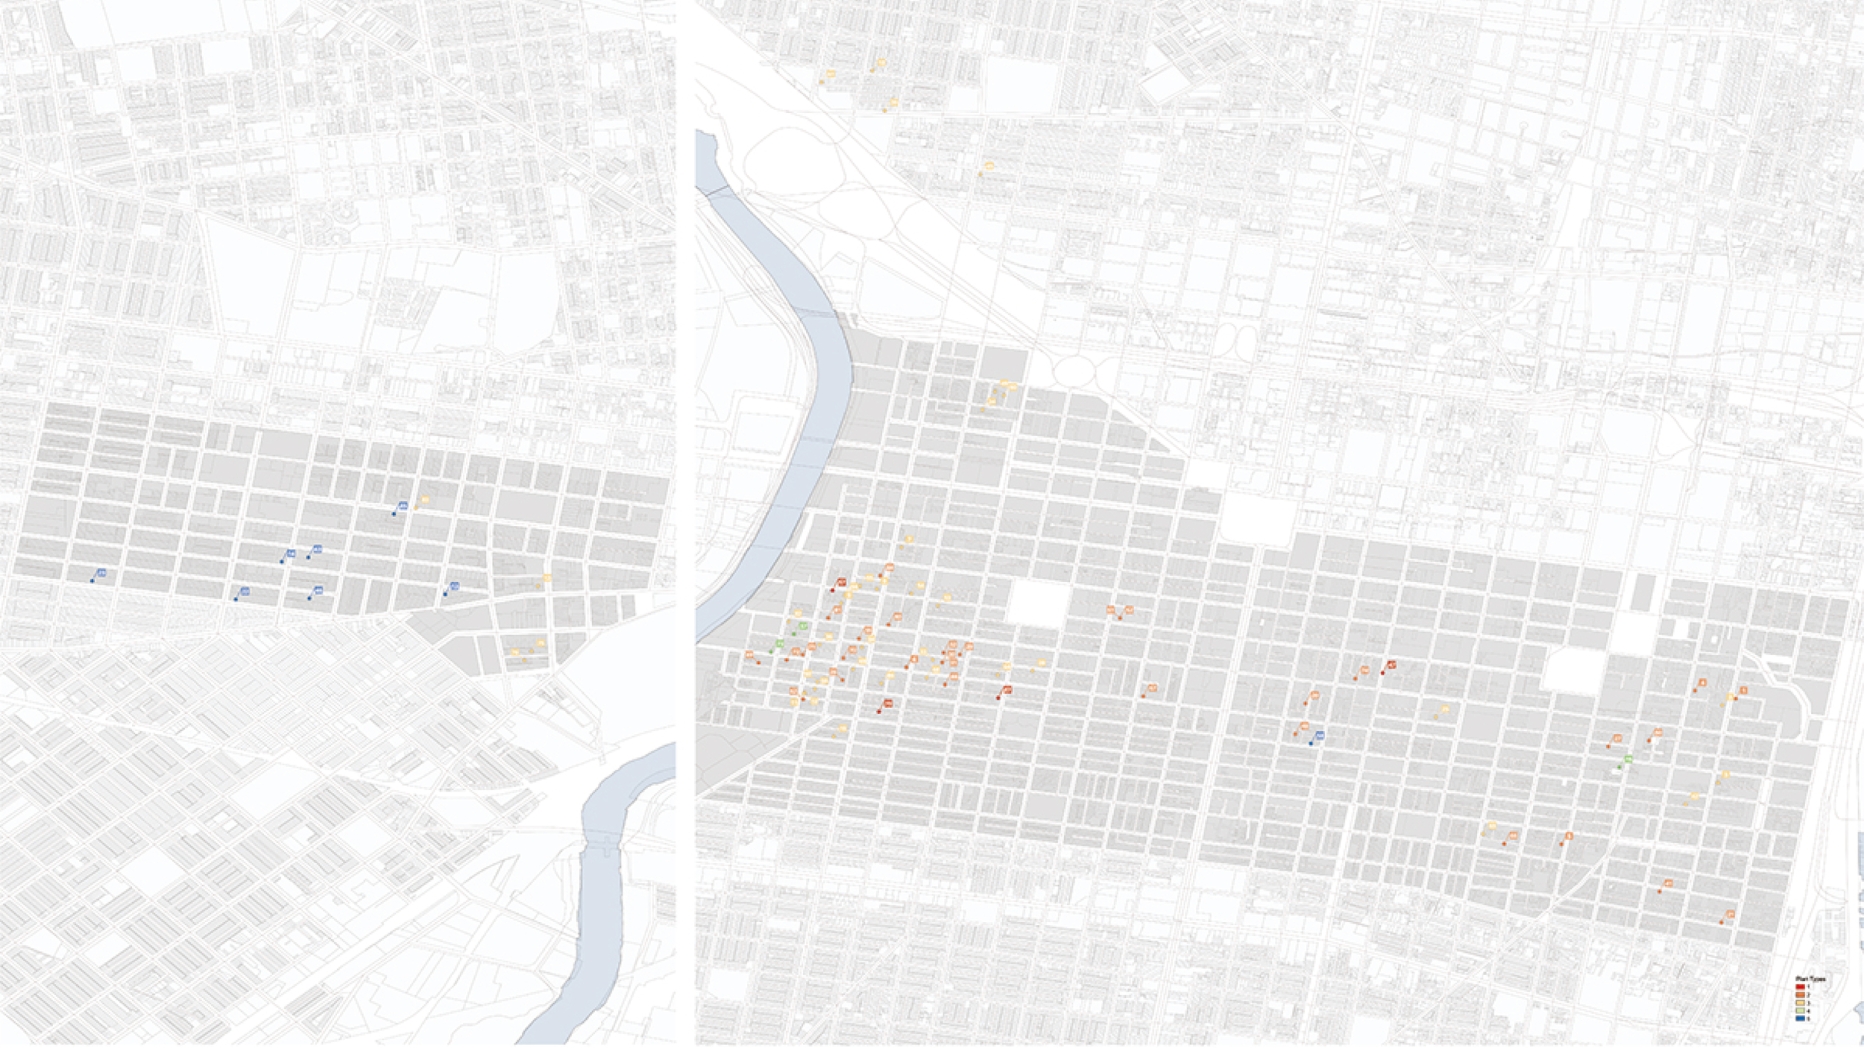 Mapping of the rowhouse buildings in Philadelphia